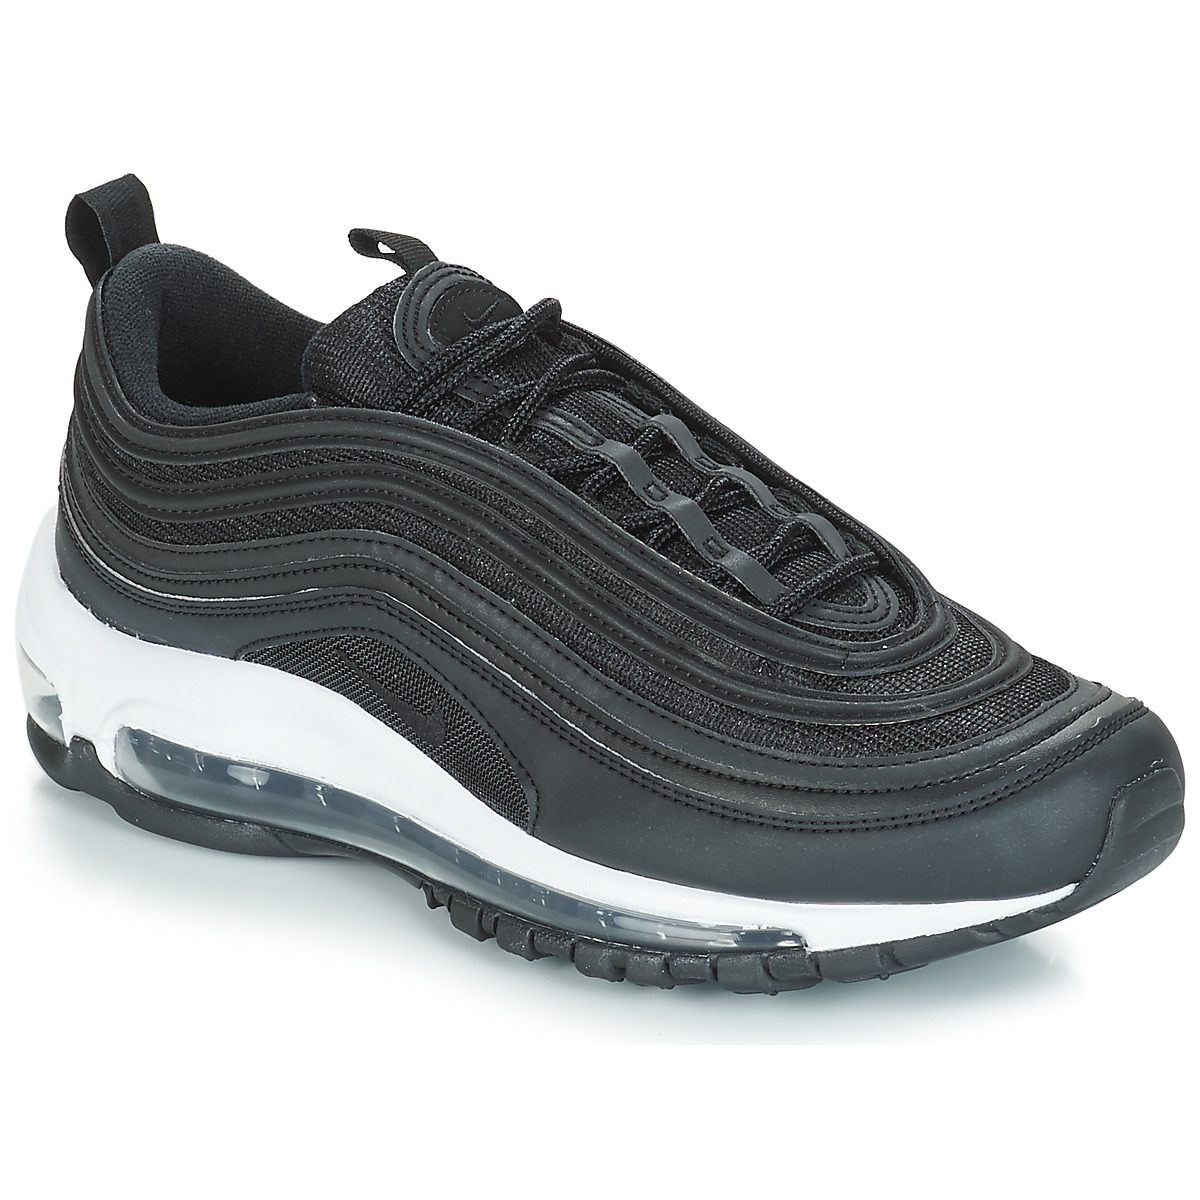 Soldes > chaussures air max 97 > en stock